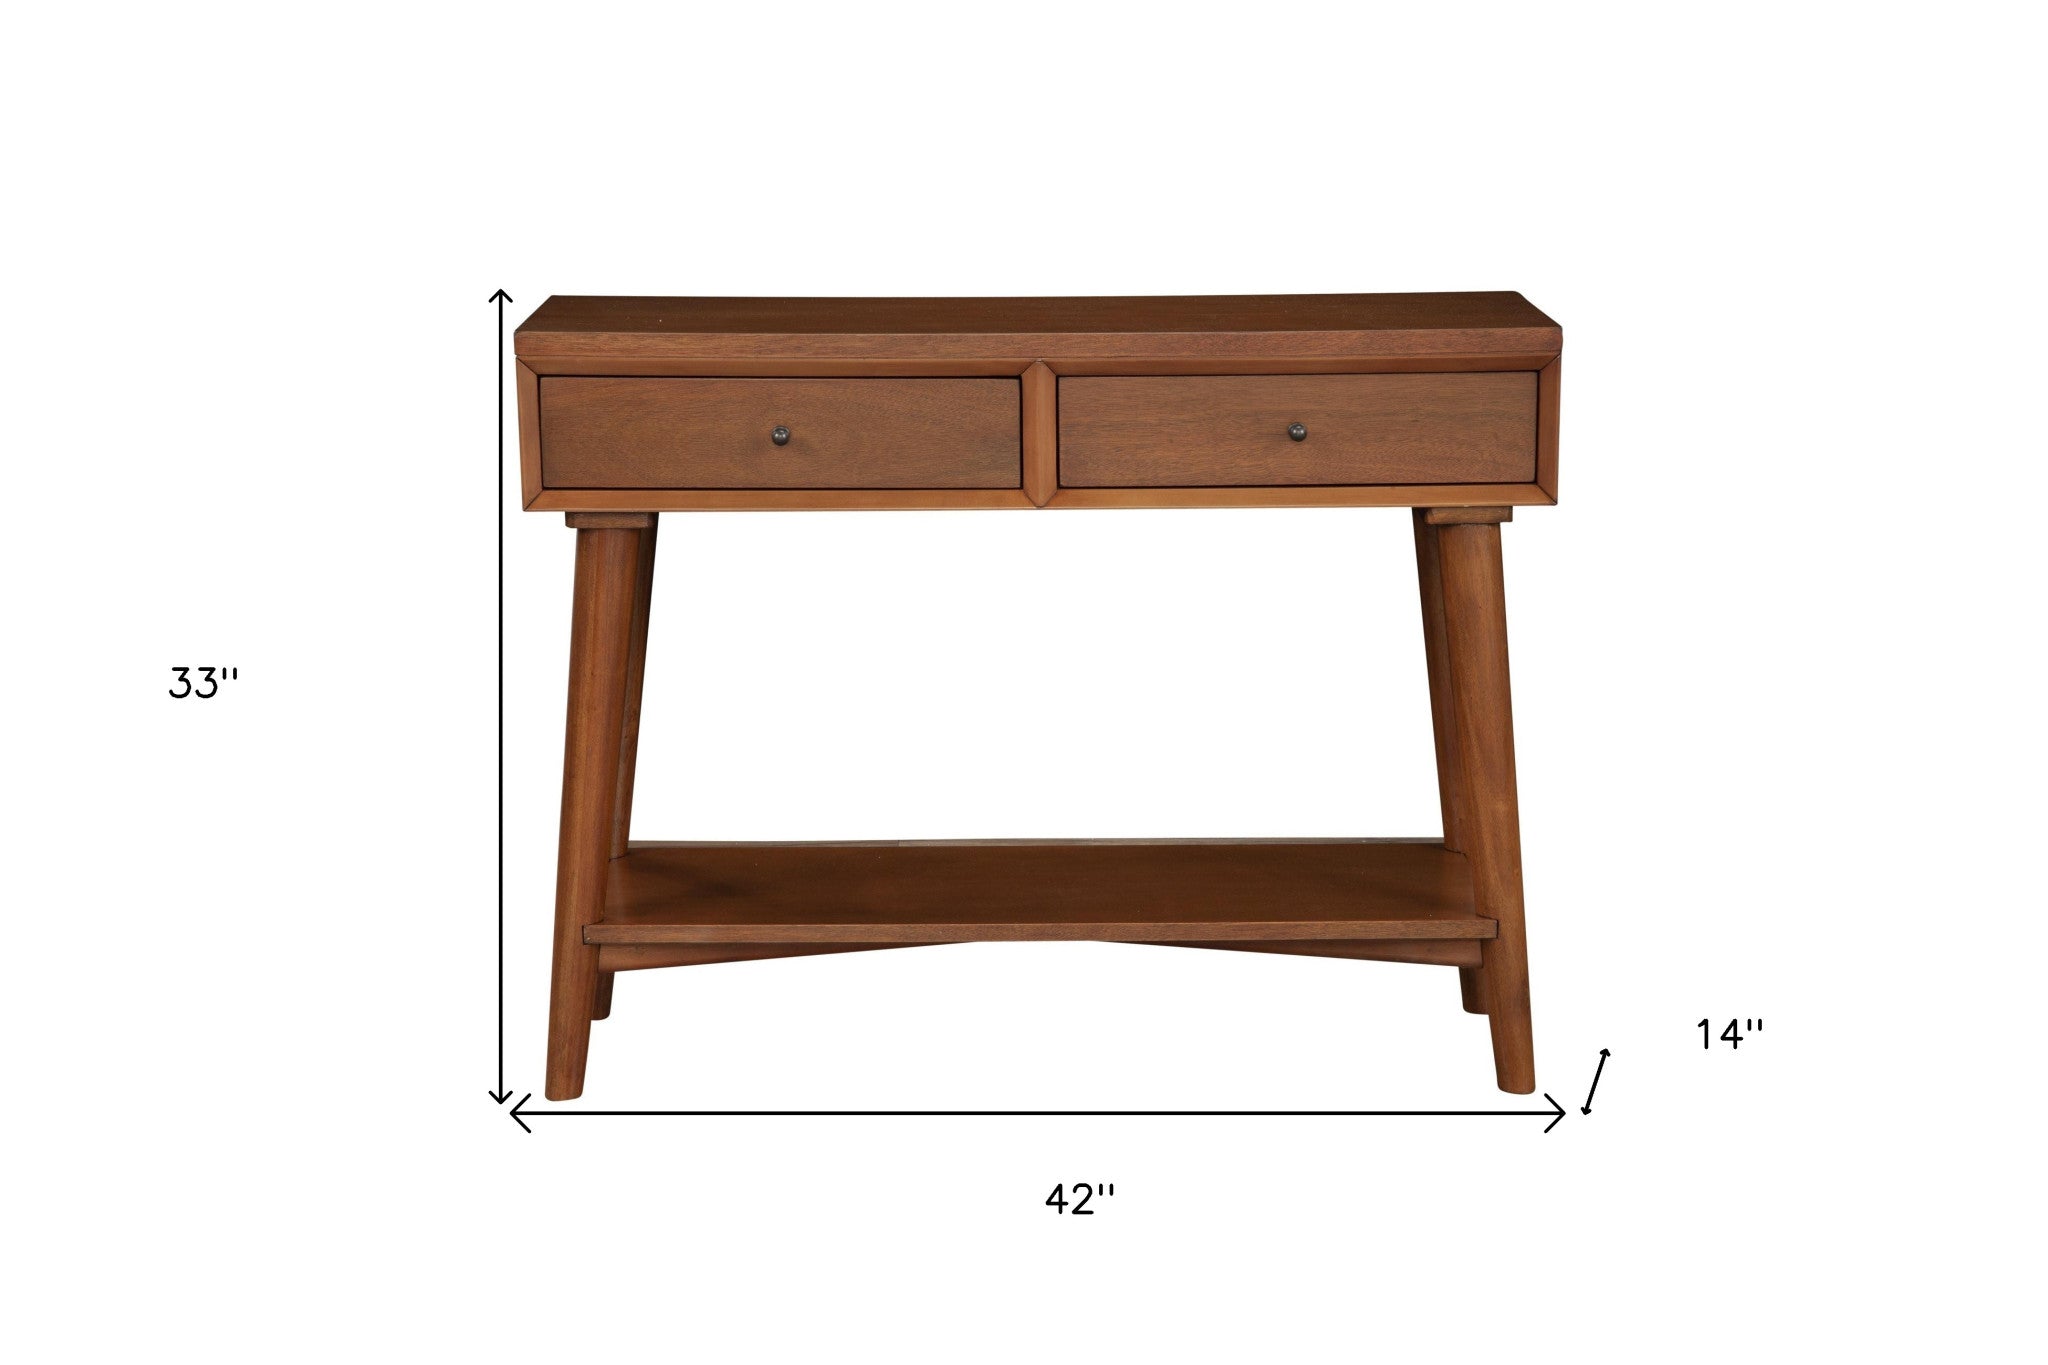 42" Brown Solid and Manufactured Wood Floor Shelf Console Table With Storage With Storage